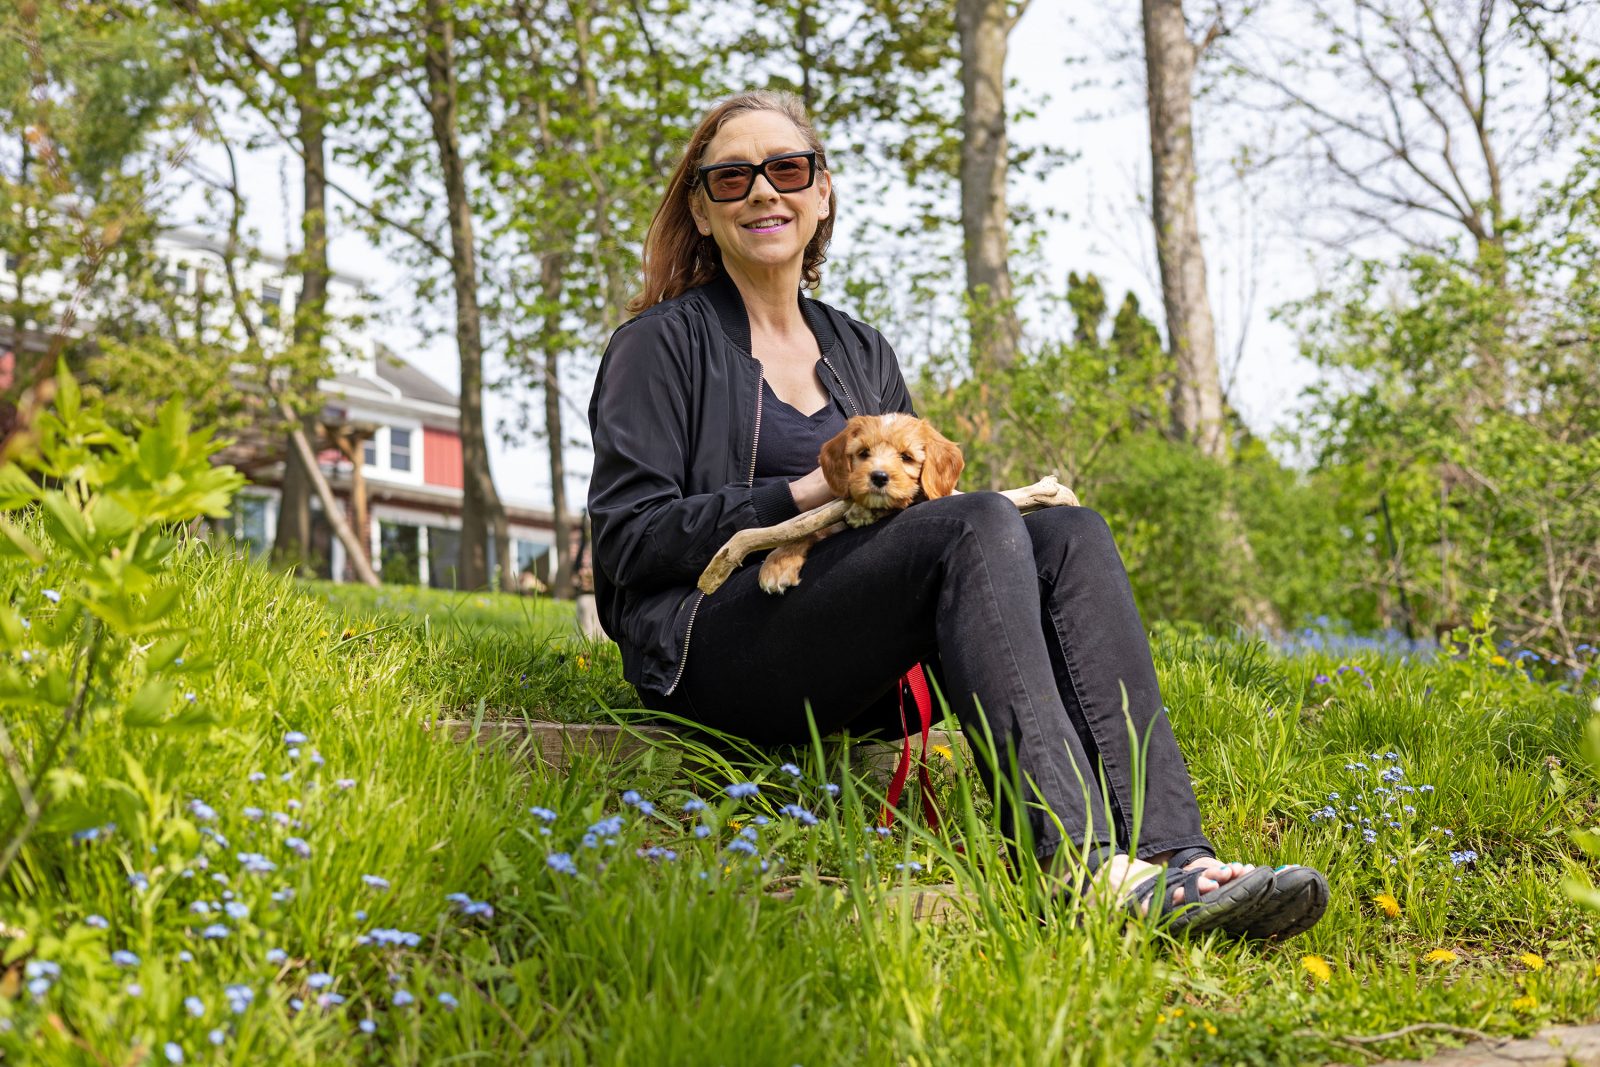 Brock Associate Professor of Visual Arts Donna Szoke sits on a grassy hill with a small brown puppy in her arms.